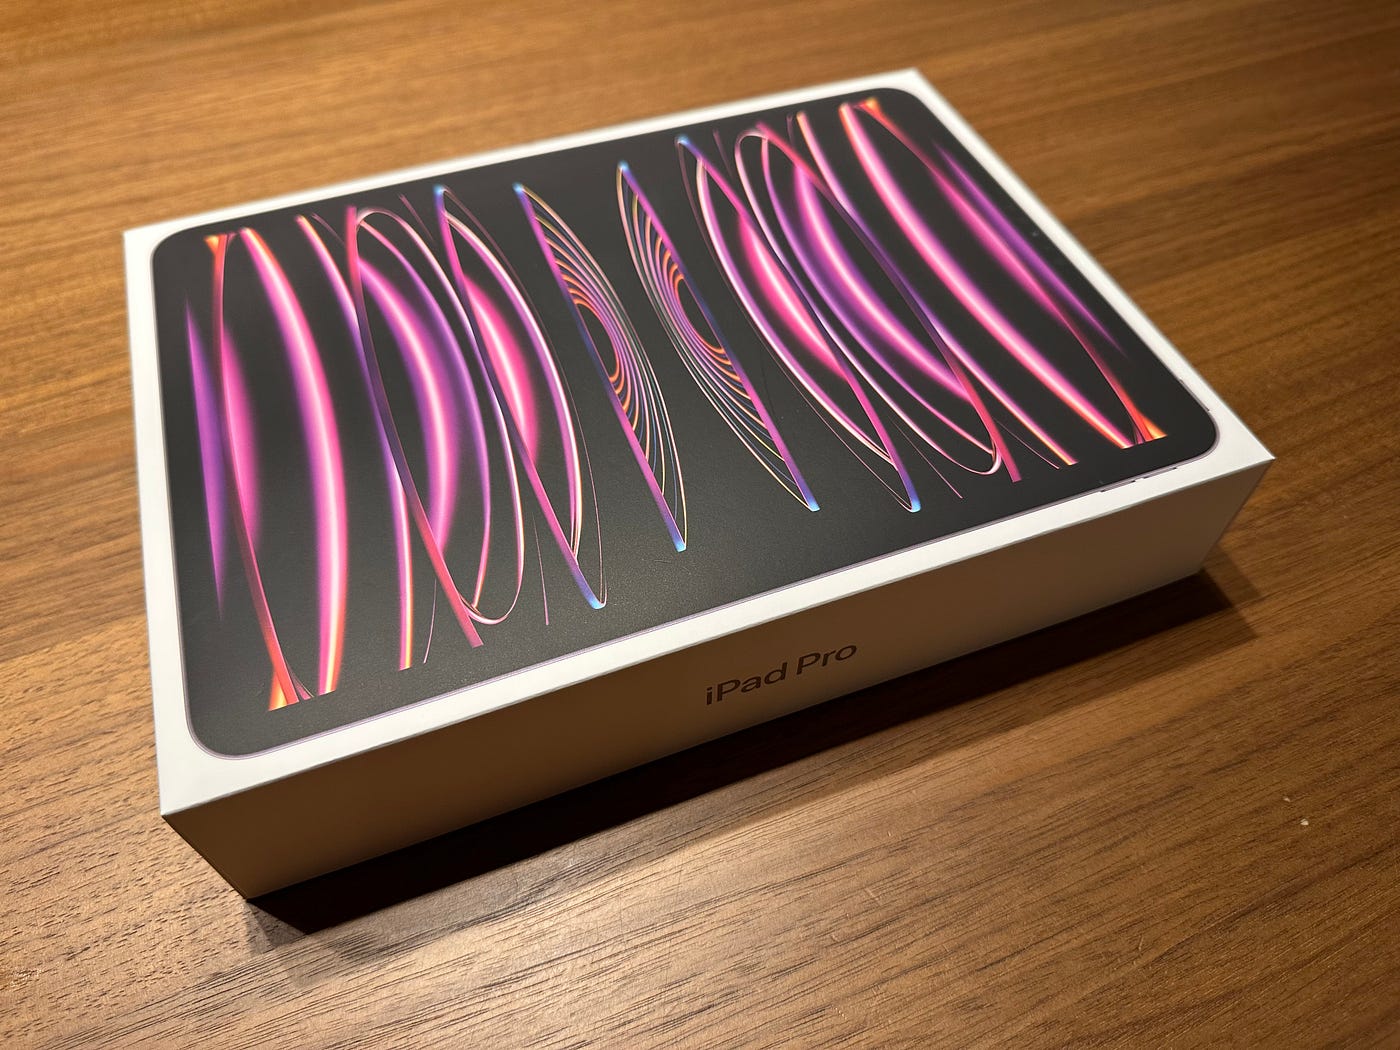 The One That Says “iPad Pro”. A few *very* brief thoughts on the